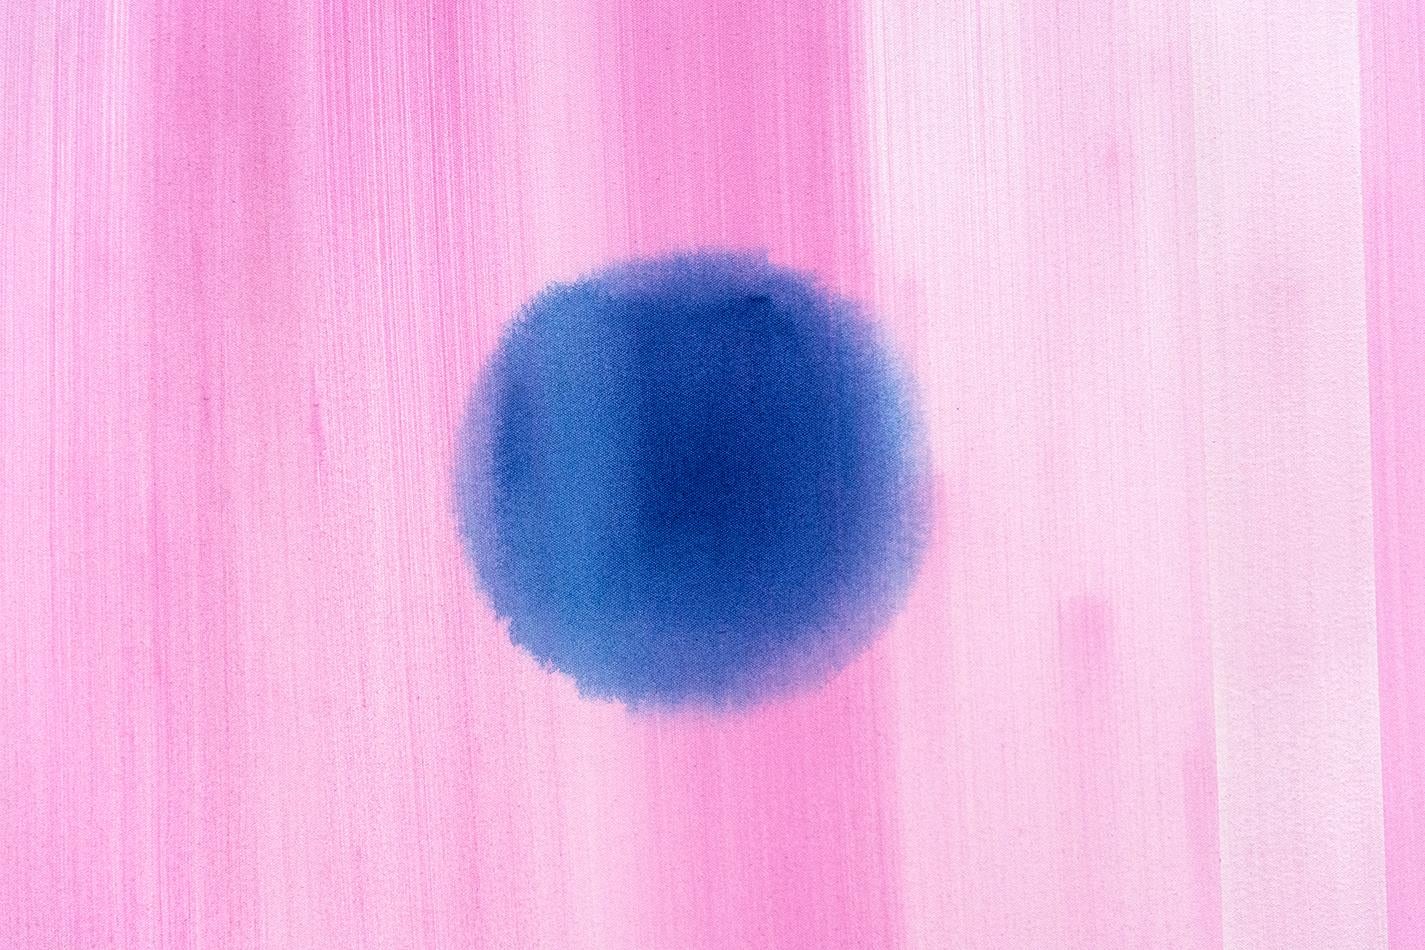 Milly Ristvedt explores the emotional potential of color and form -- spheres of turquoise and sapphire blue float in a sea of vibrant mauve. A band of light pink divides the canvas reasserting the nature of the picture plane in this masterful